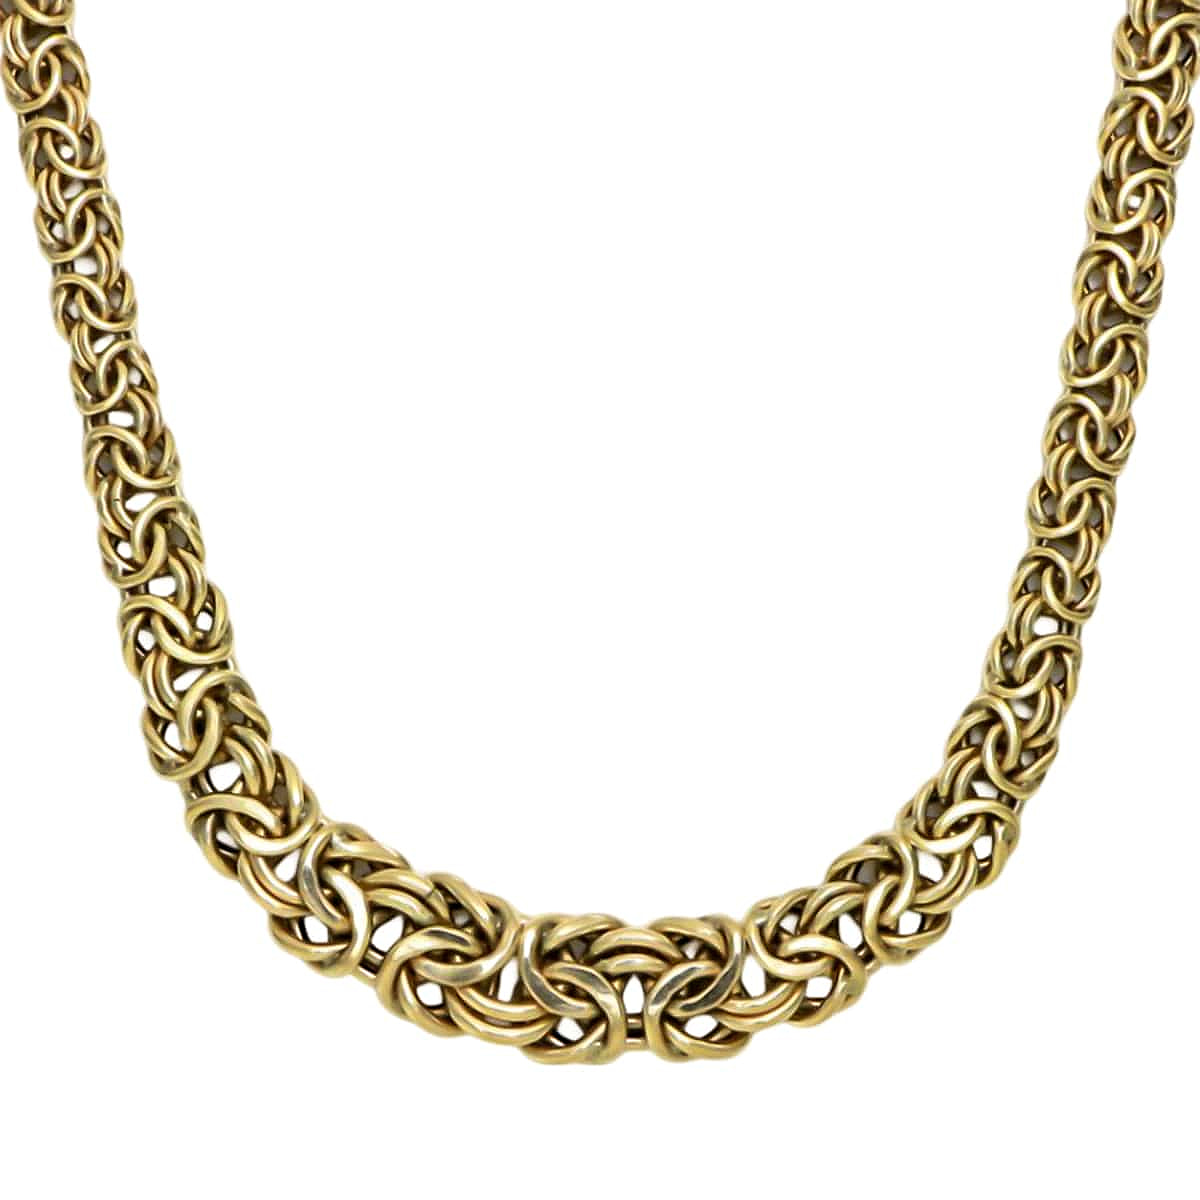 Maestro Collection - 9K Yellow Gold Byzantine Necklace (Size - 20), Gold Wt. 26.26 Gms